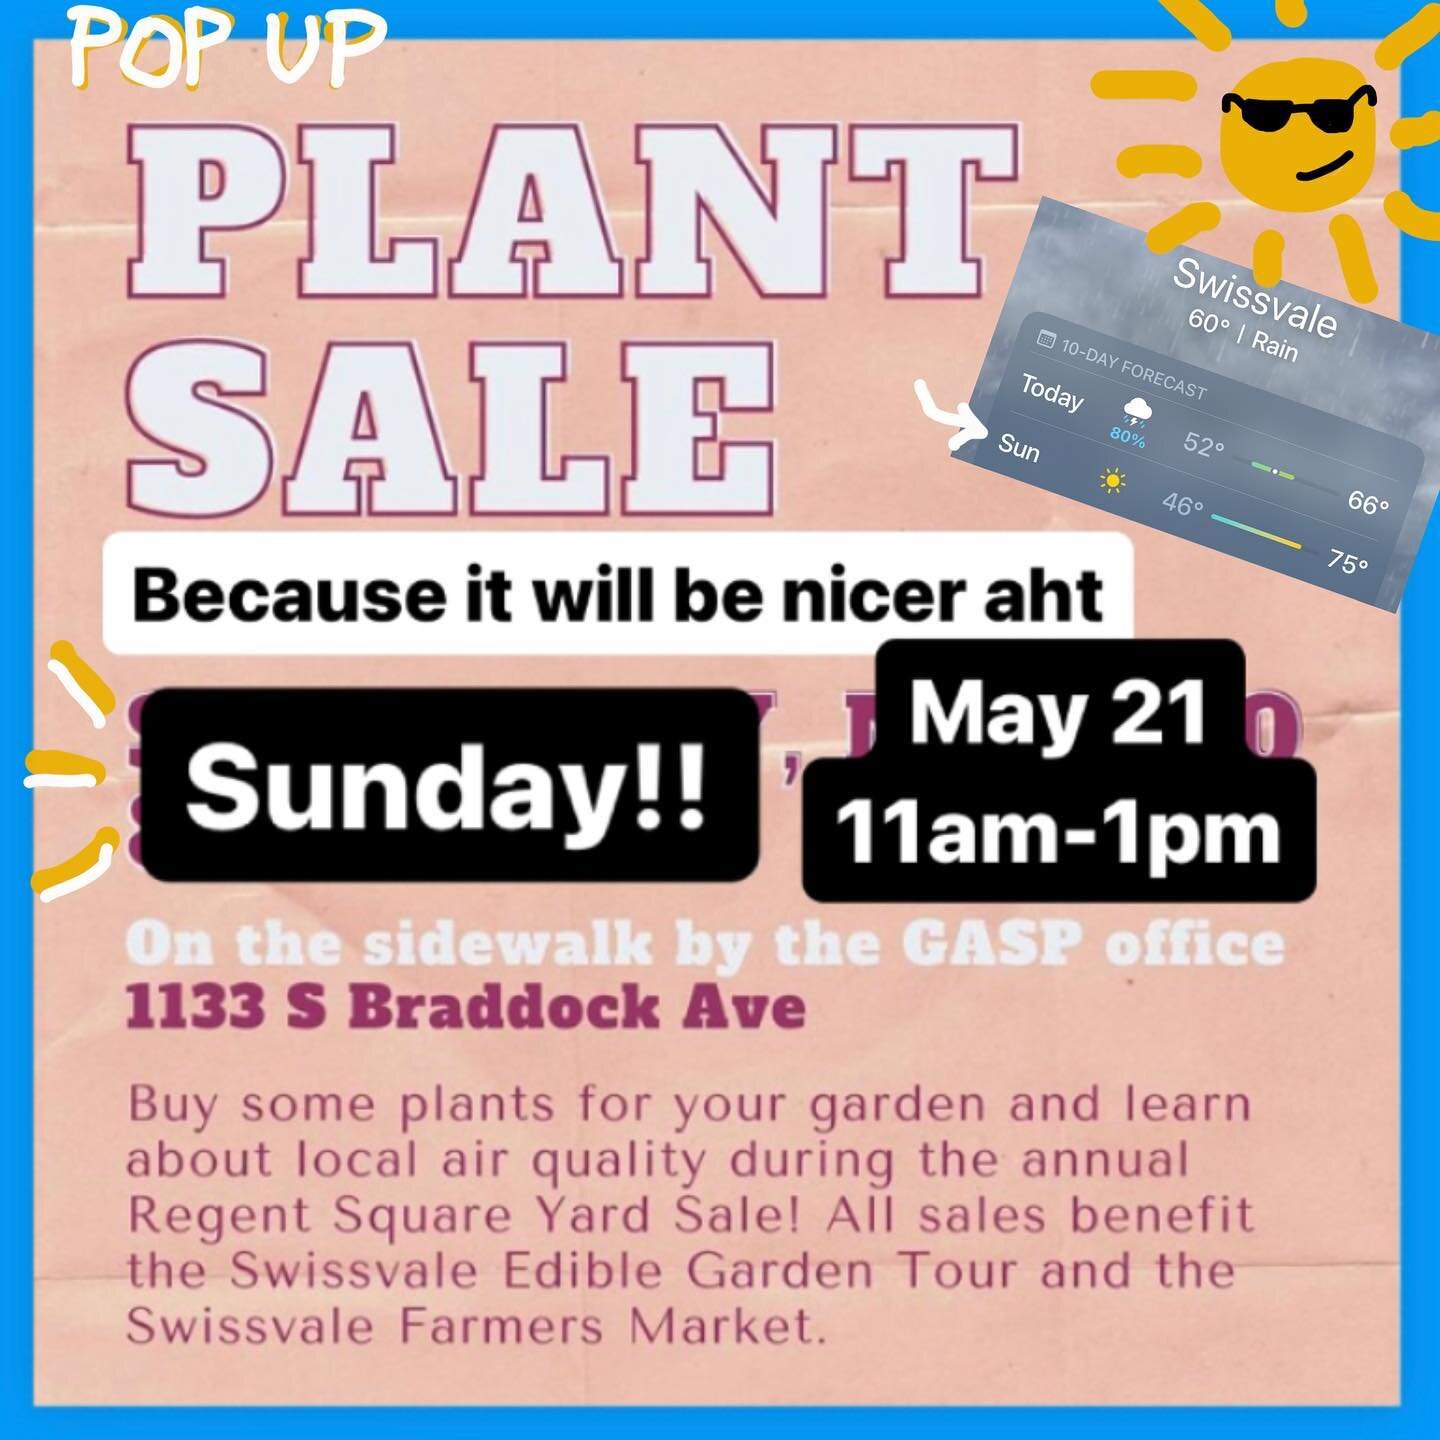 Thanks to everyone who bought plants and got rained on! Sunday looks way nicer so we&rsquo;ll be back on the same corner, this time from about 11am-1pm, with tons of great plants.